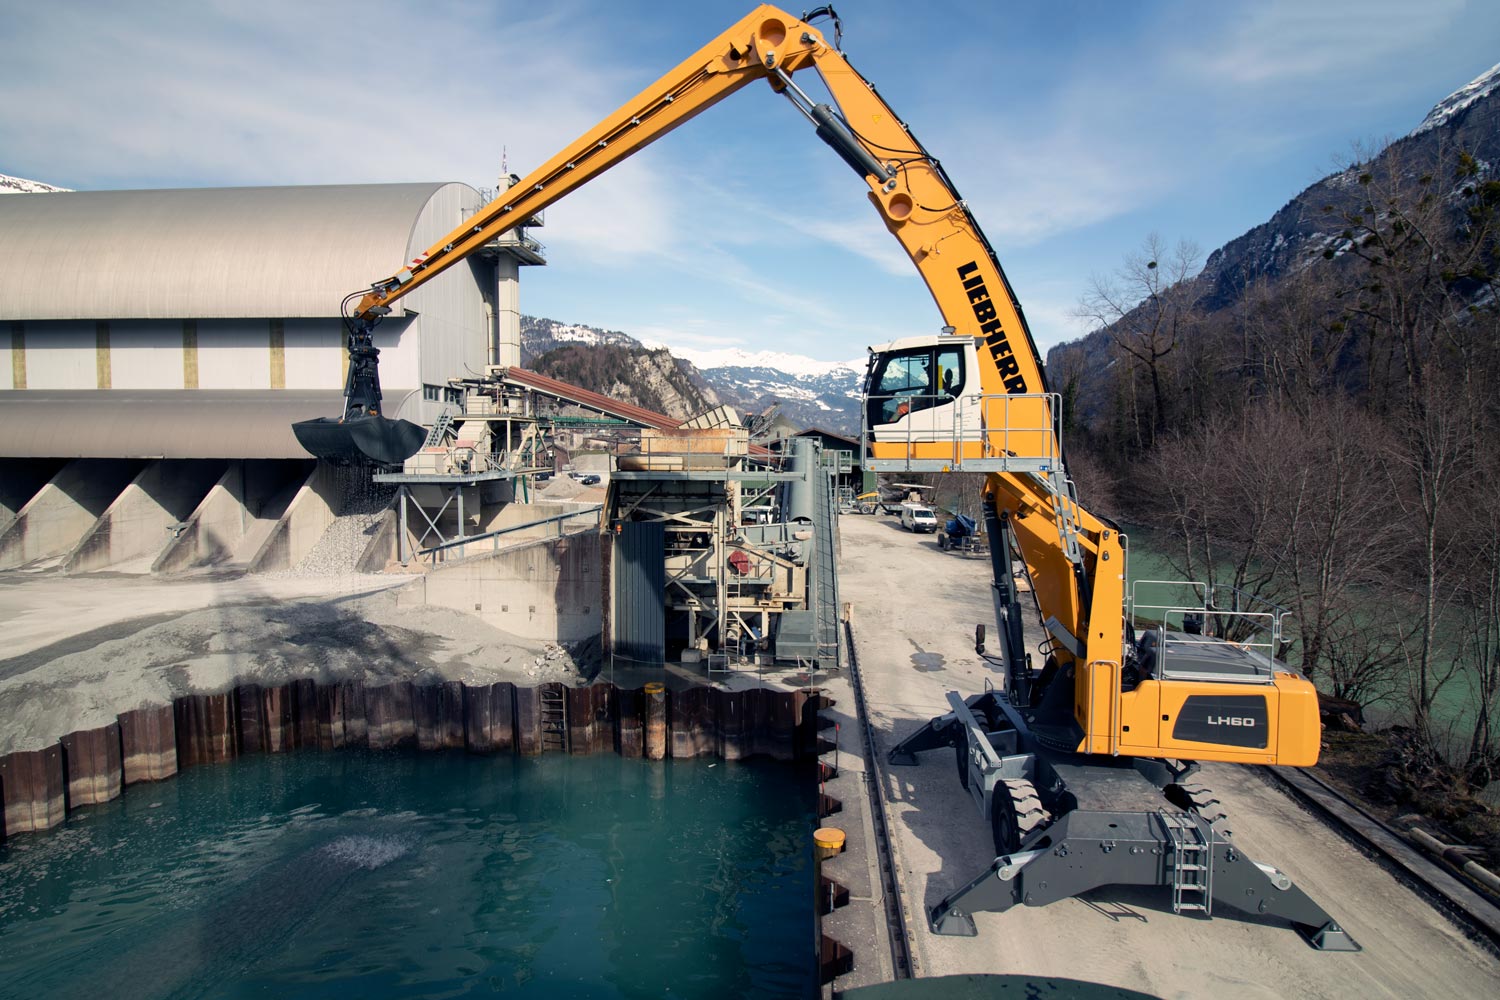 Fully operational for a Swiss natural product: the Liebherr LH 60 M Port Litronic material handler will assist in the quarrying and production of the trademark product Brienzer Sand®.